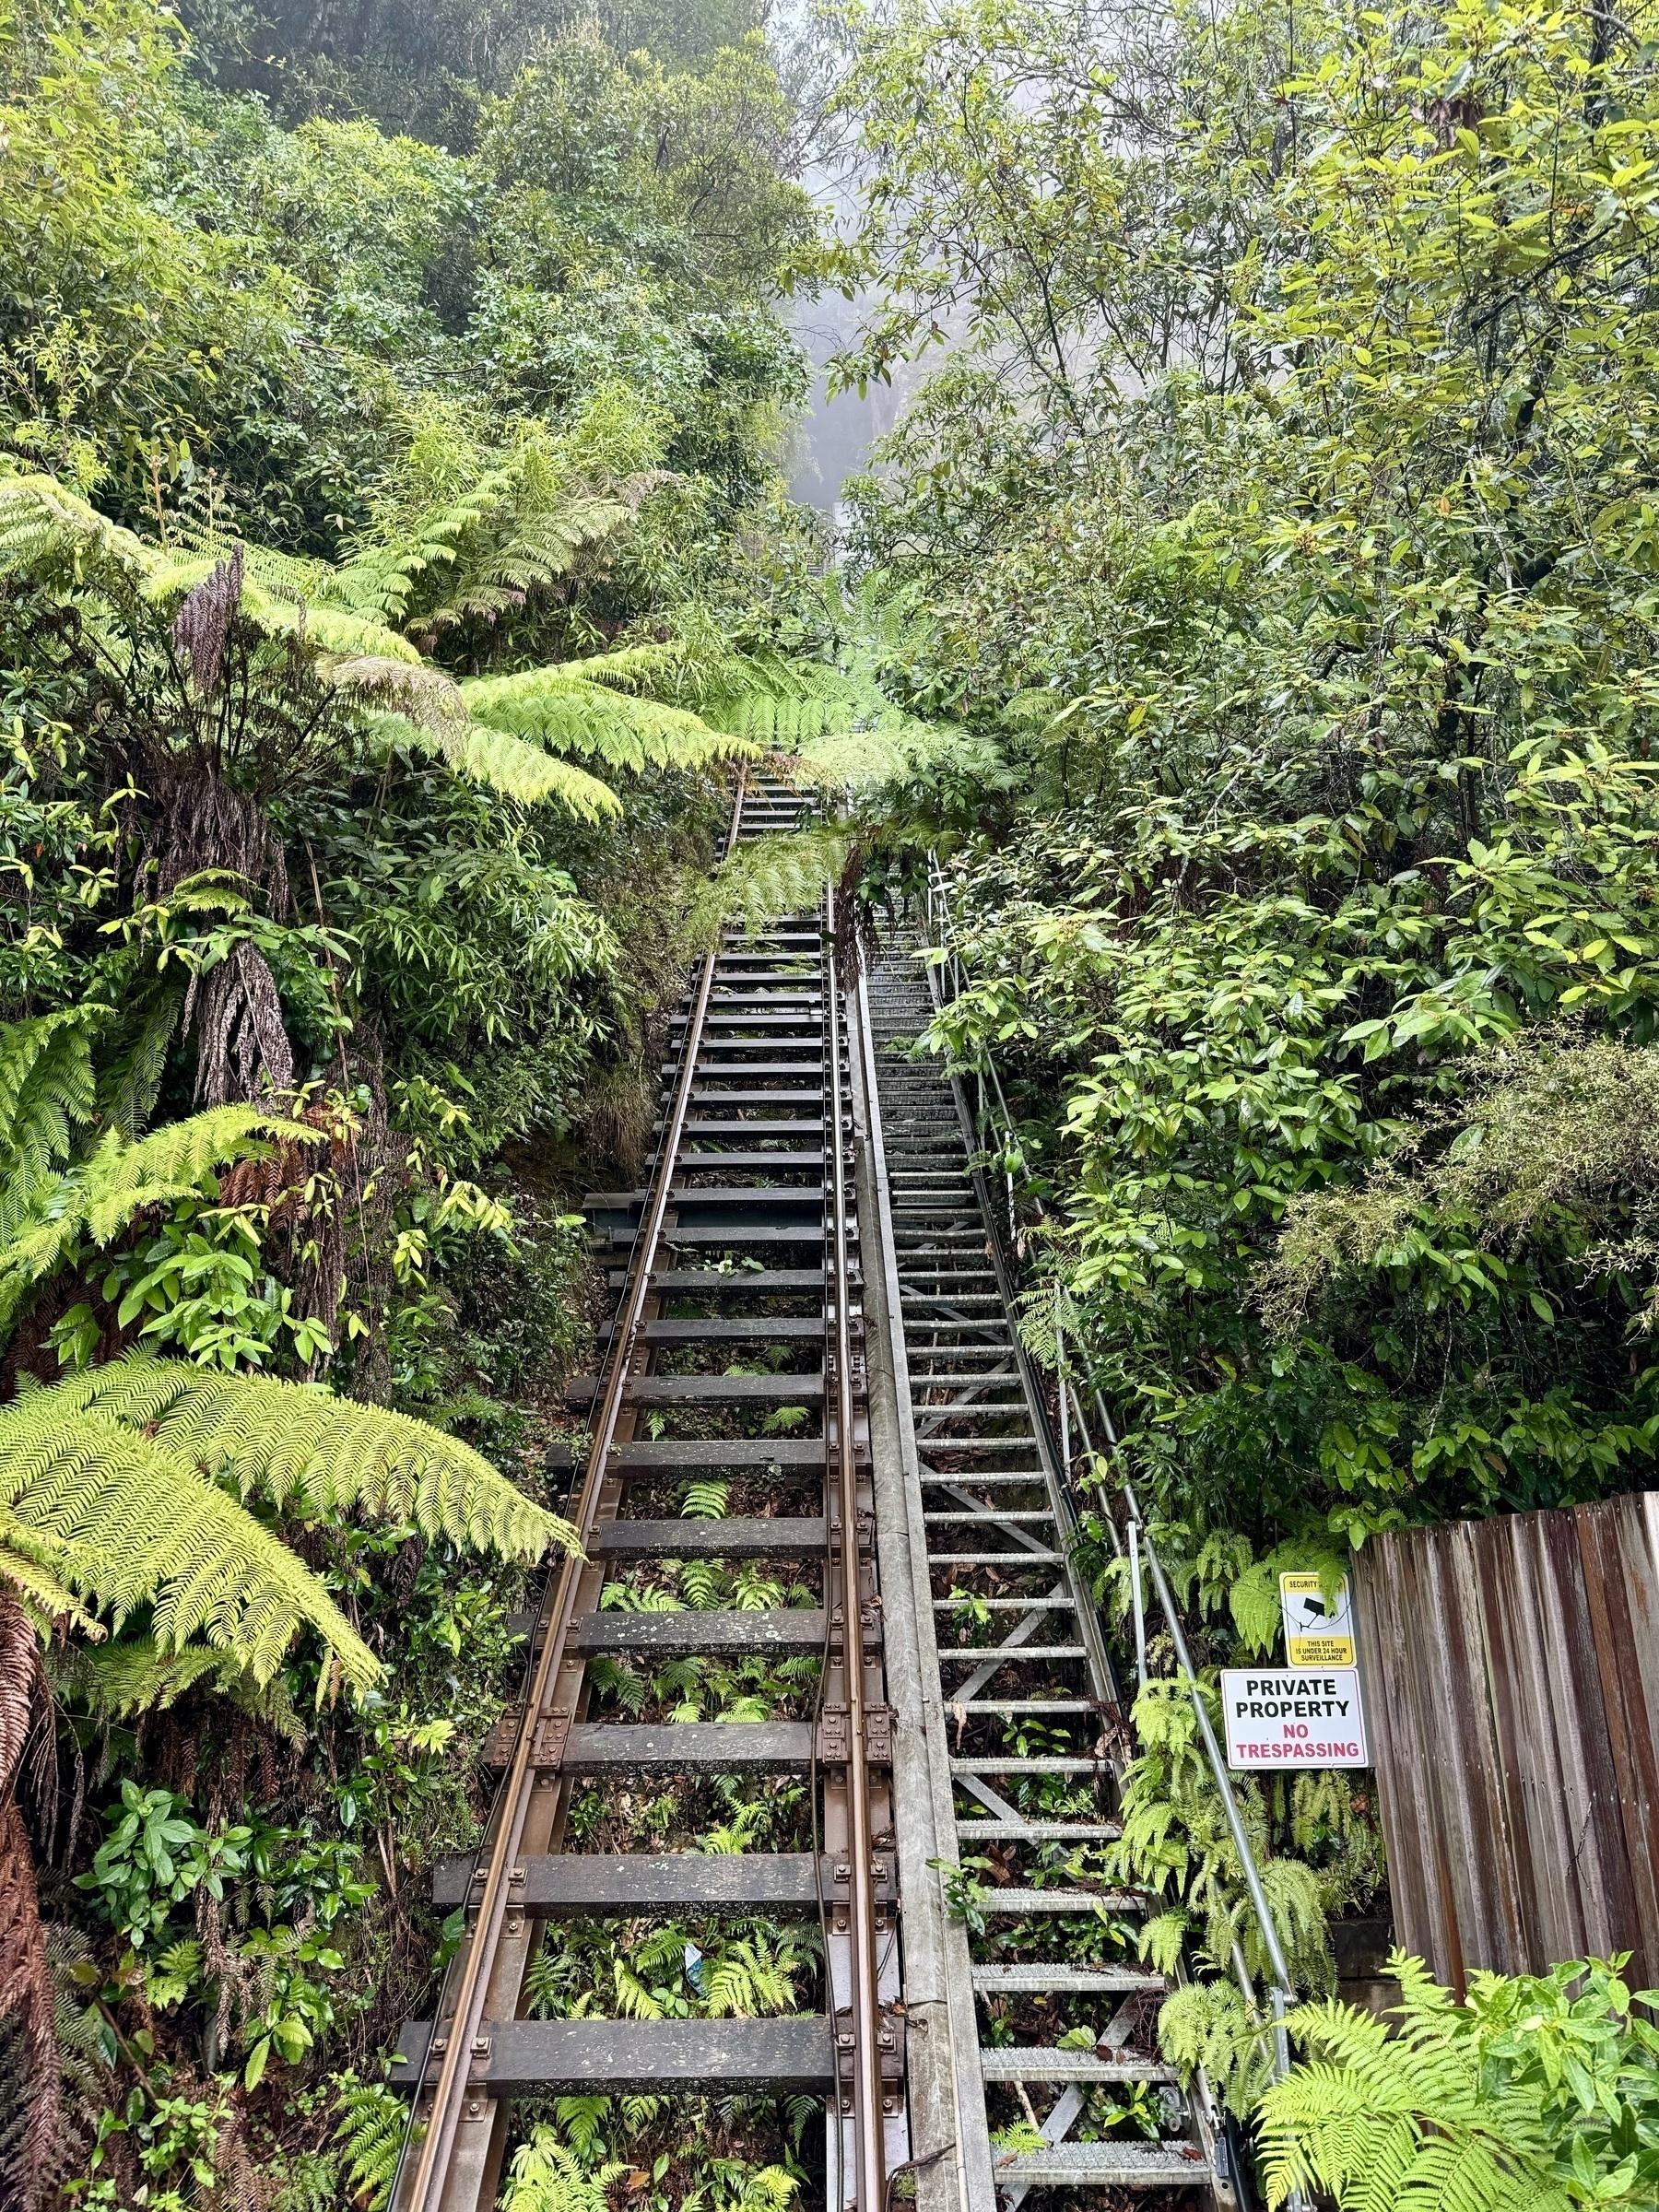 A steep railway ascending in to a rainforest.